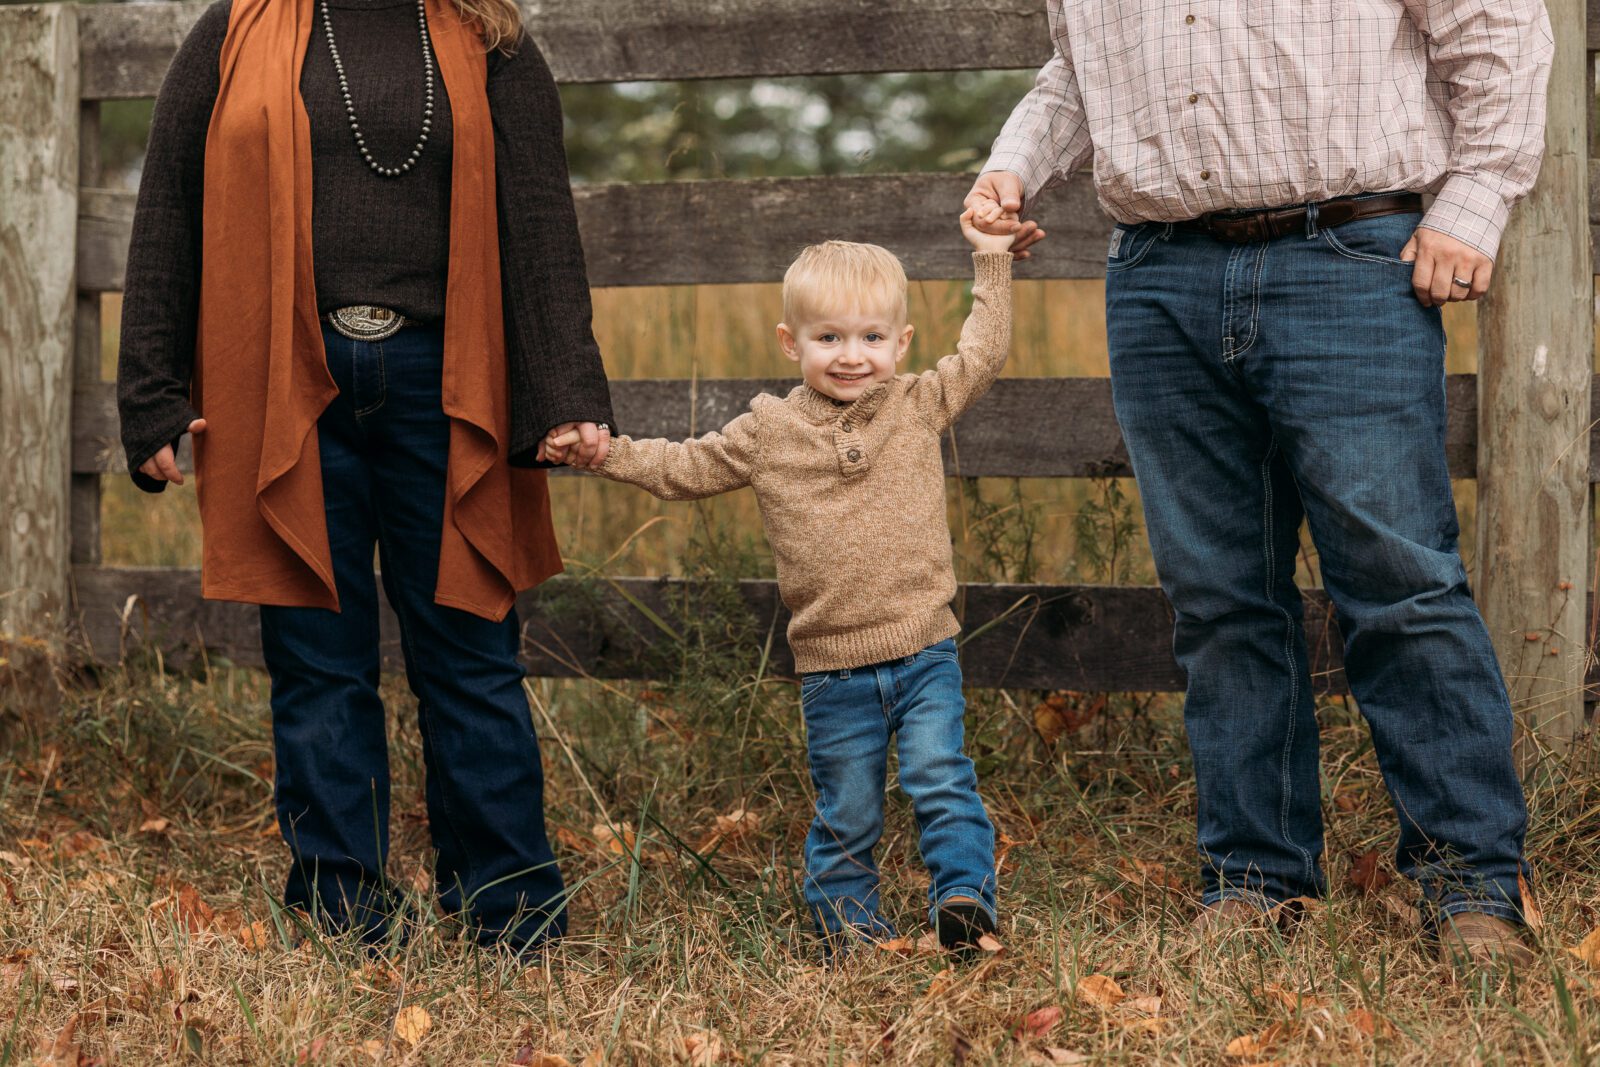 Tips for family photos with young children